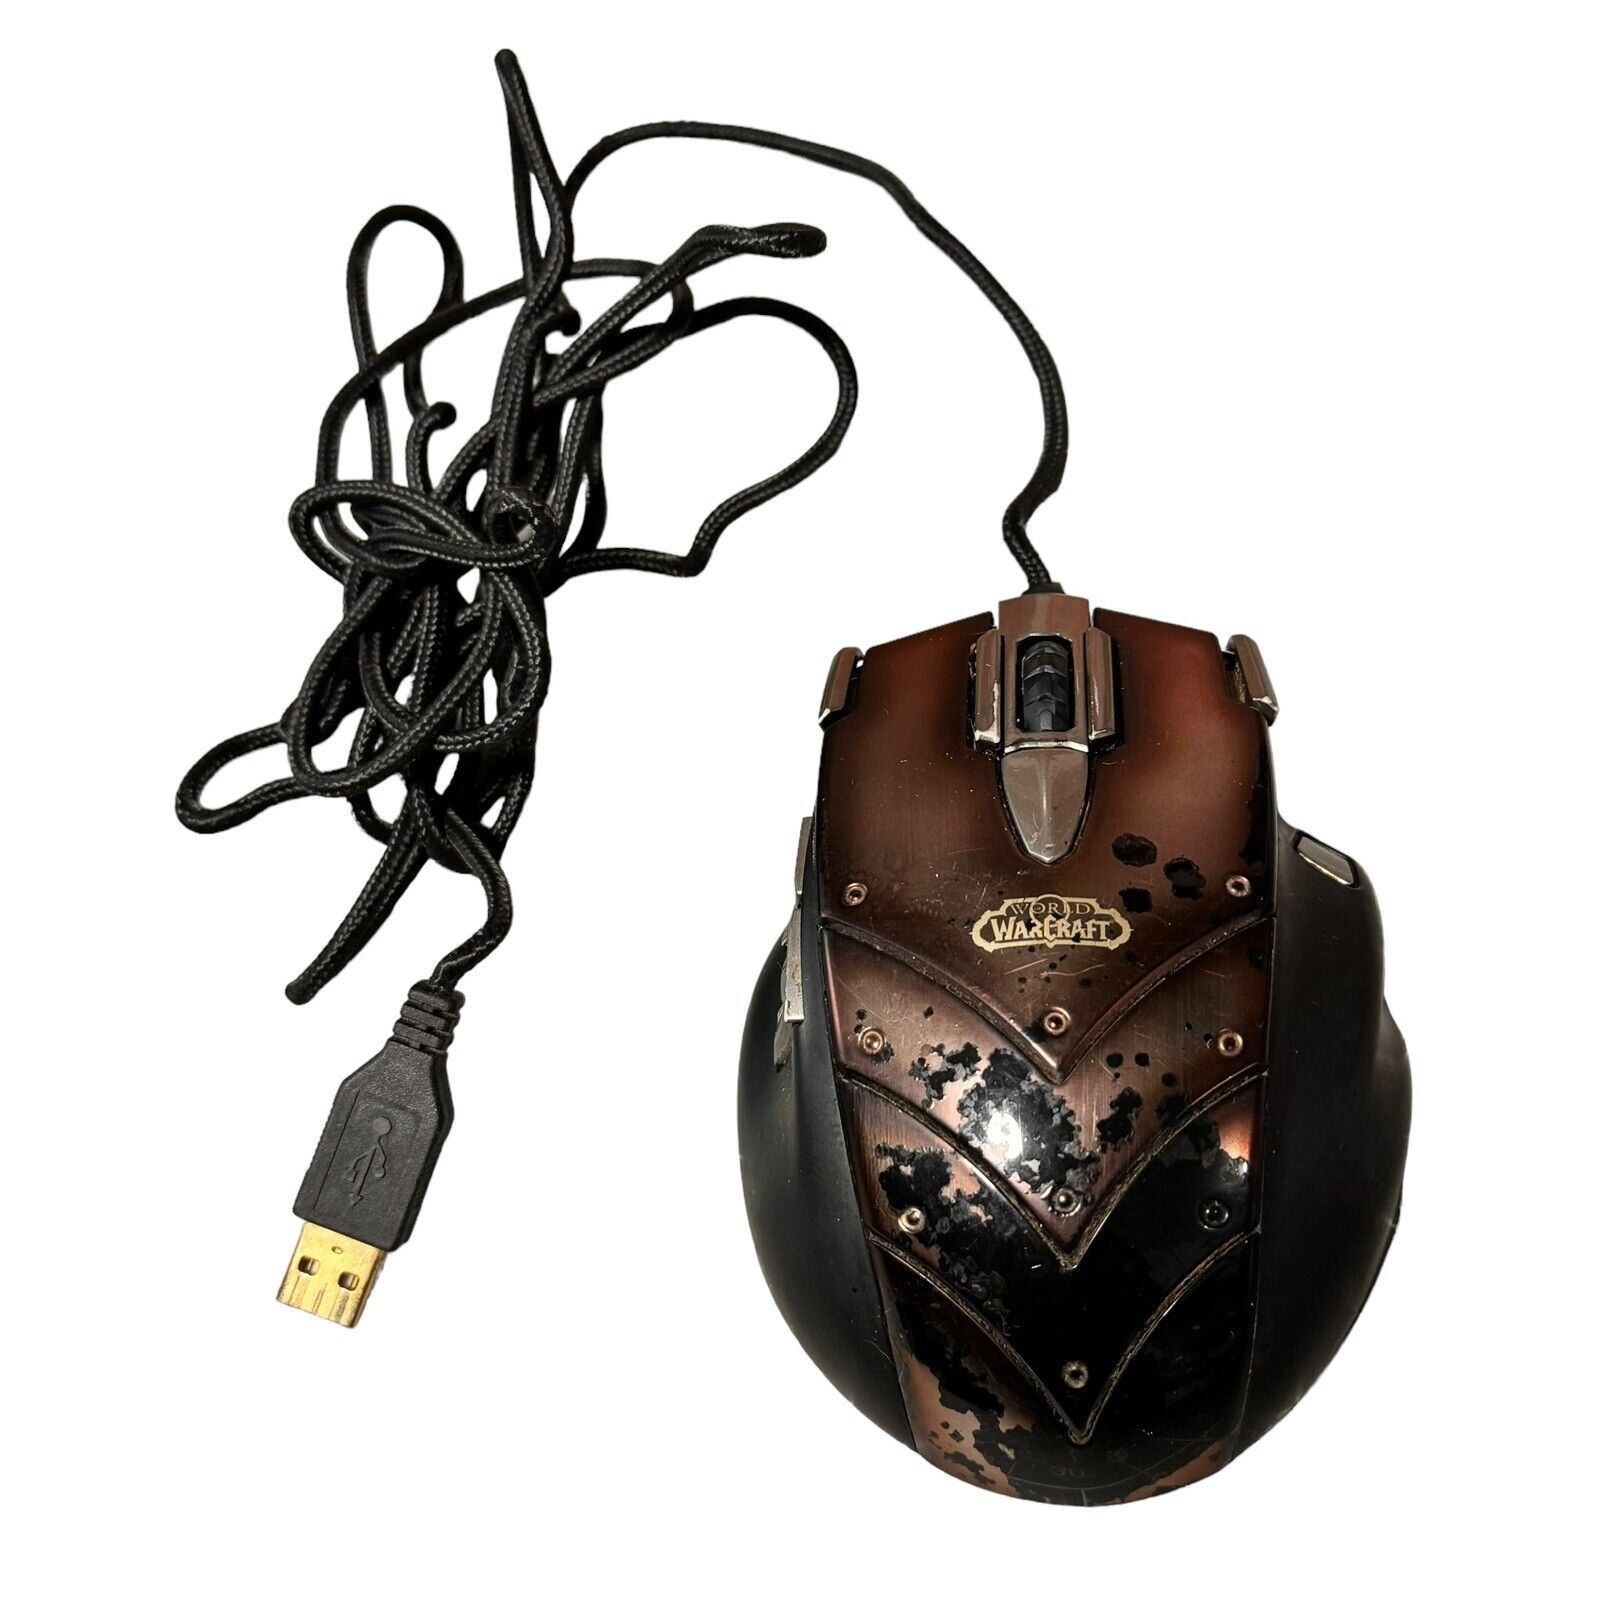 SteelSeries World of Warcraft Cataclysm MMO Gaming Mouse (see description)